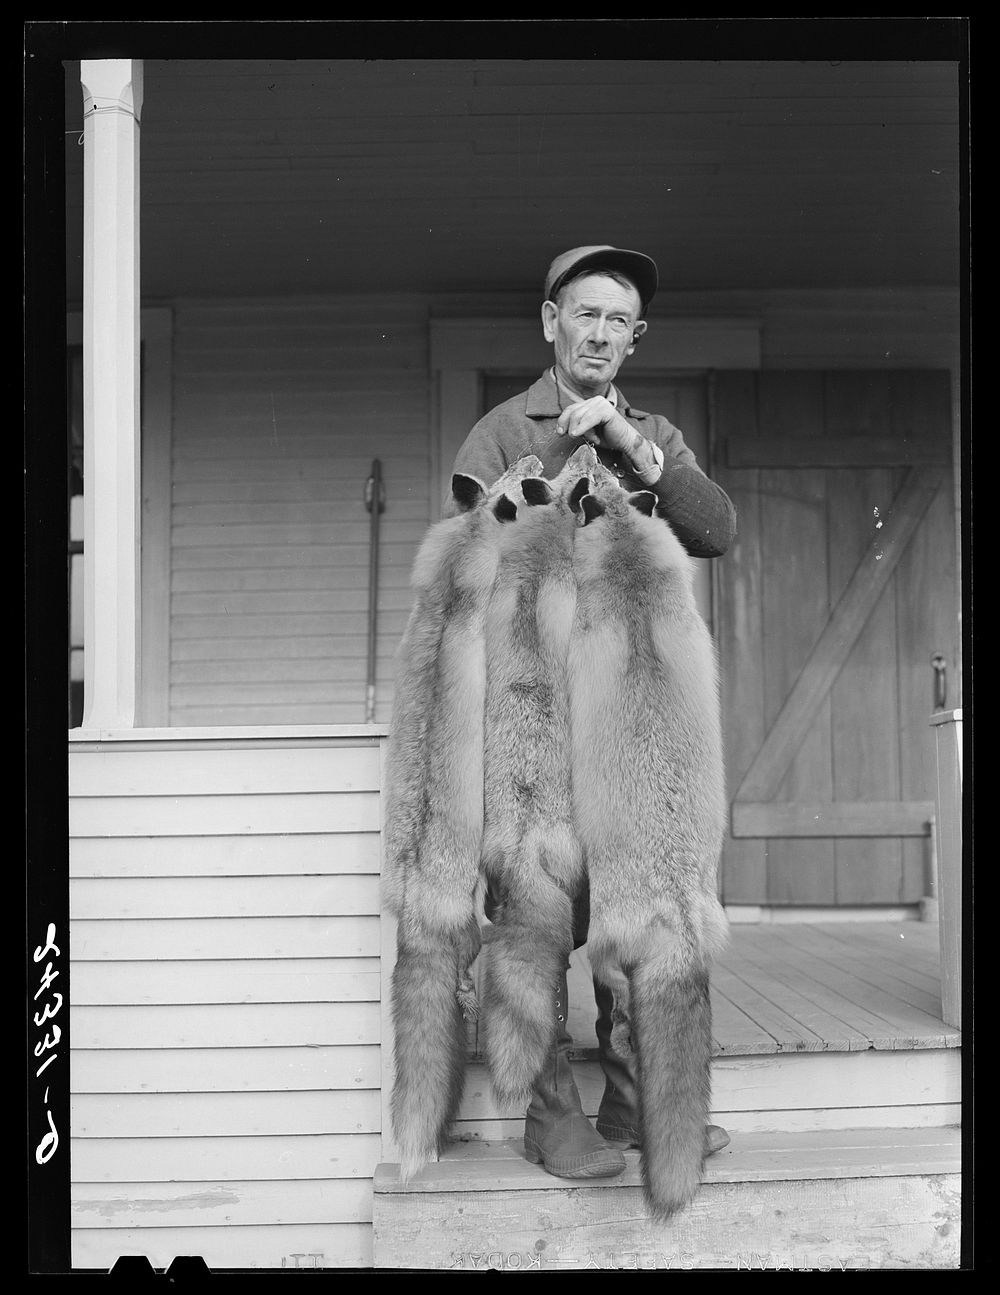 Perley Mosley with three pelts from foxes he trapped. Eden Mills, Vermont. Sourced from the Library of Congress.